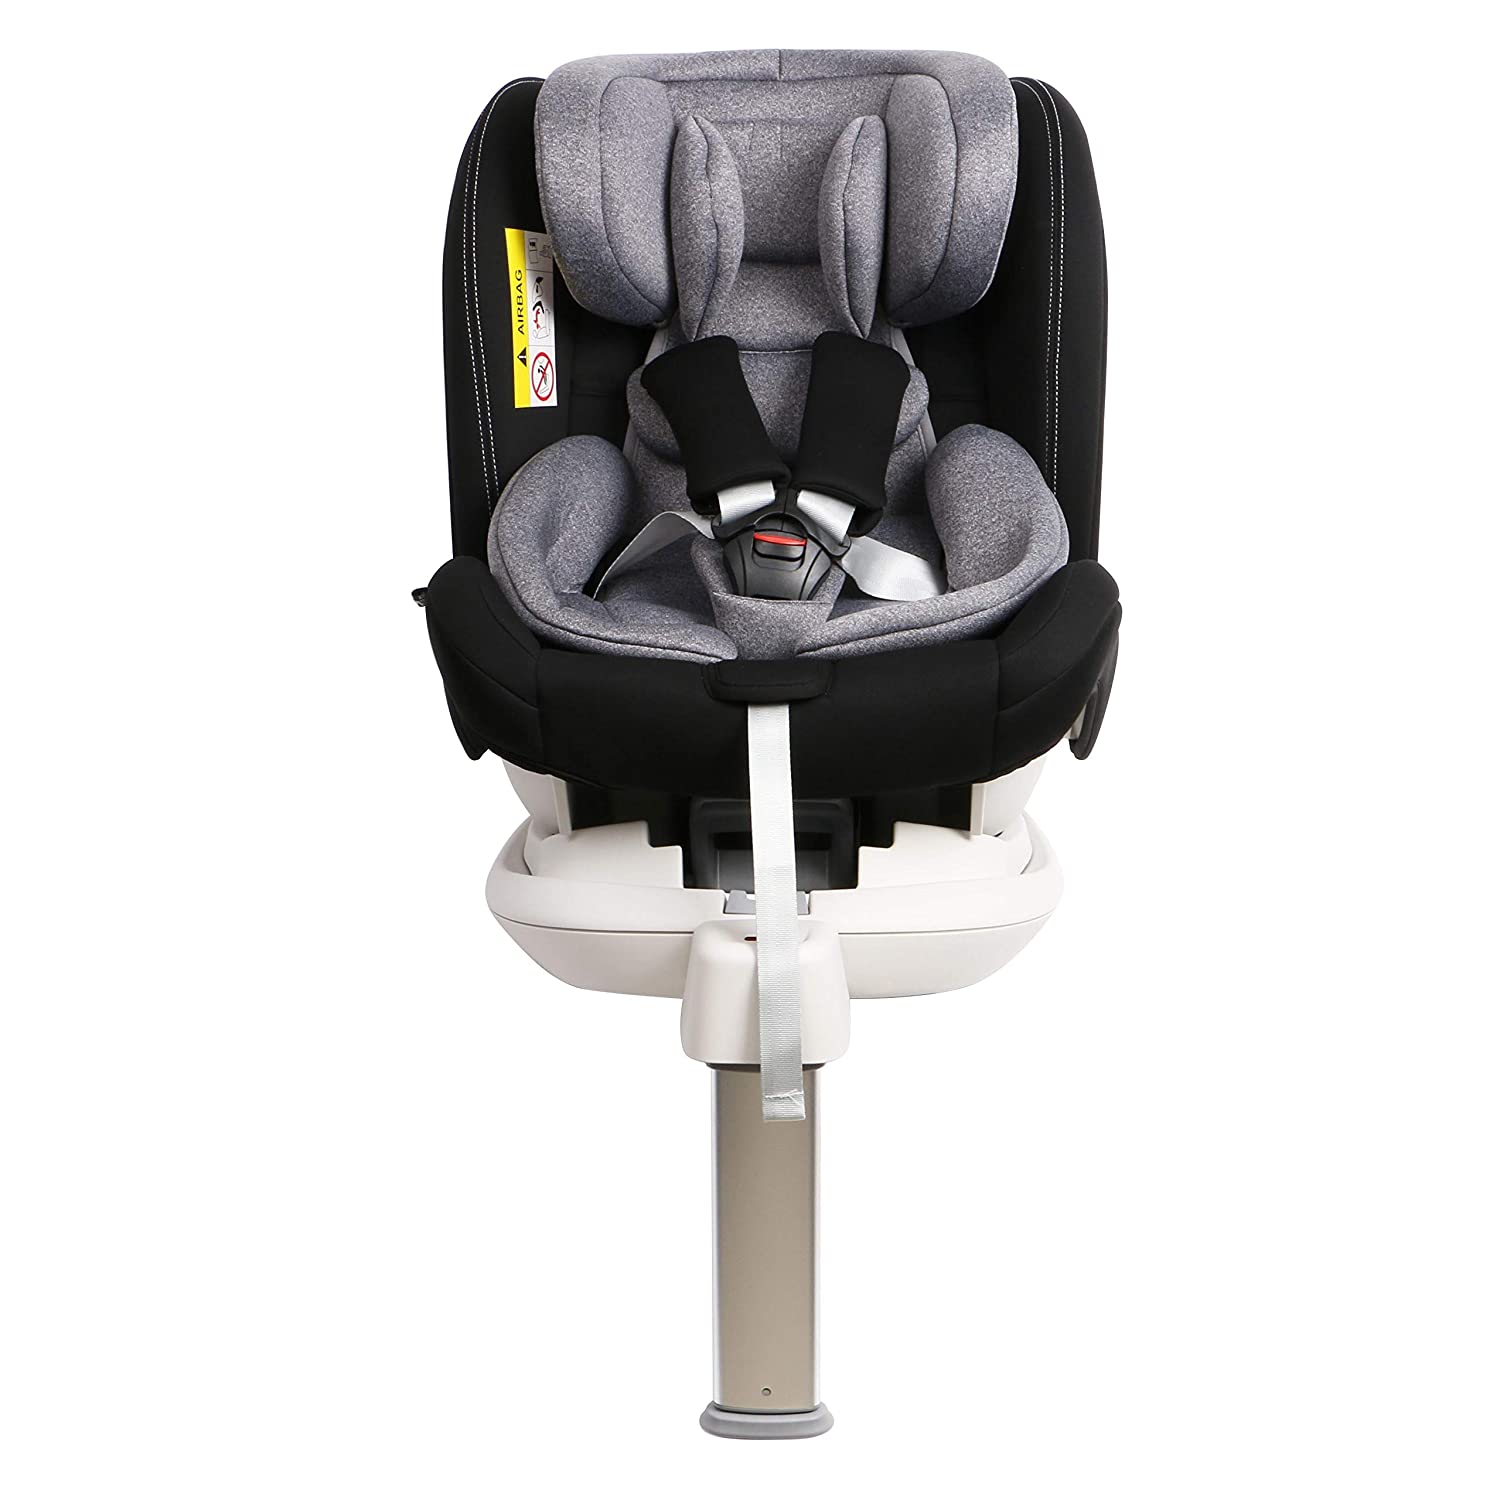 Star Ibaby Travel Plus Car Seat Group 0 1 2 3 Isofix with Support Foot